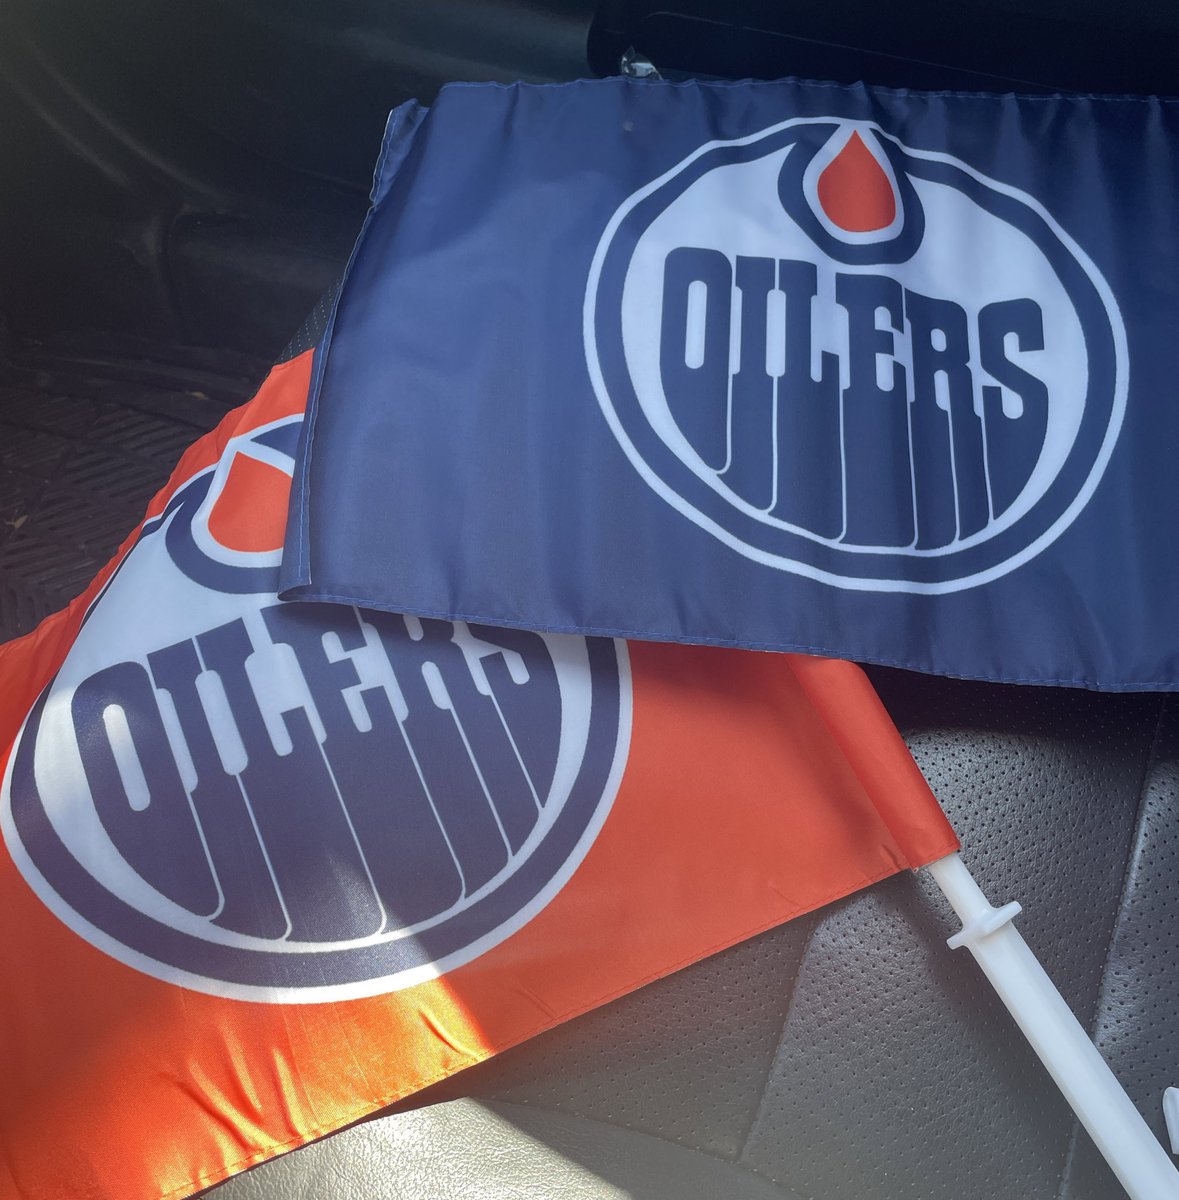 New series starting soon, and new @EdmontonOilers car flags have been acquired! #LetsGoOilers 👌🏻